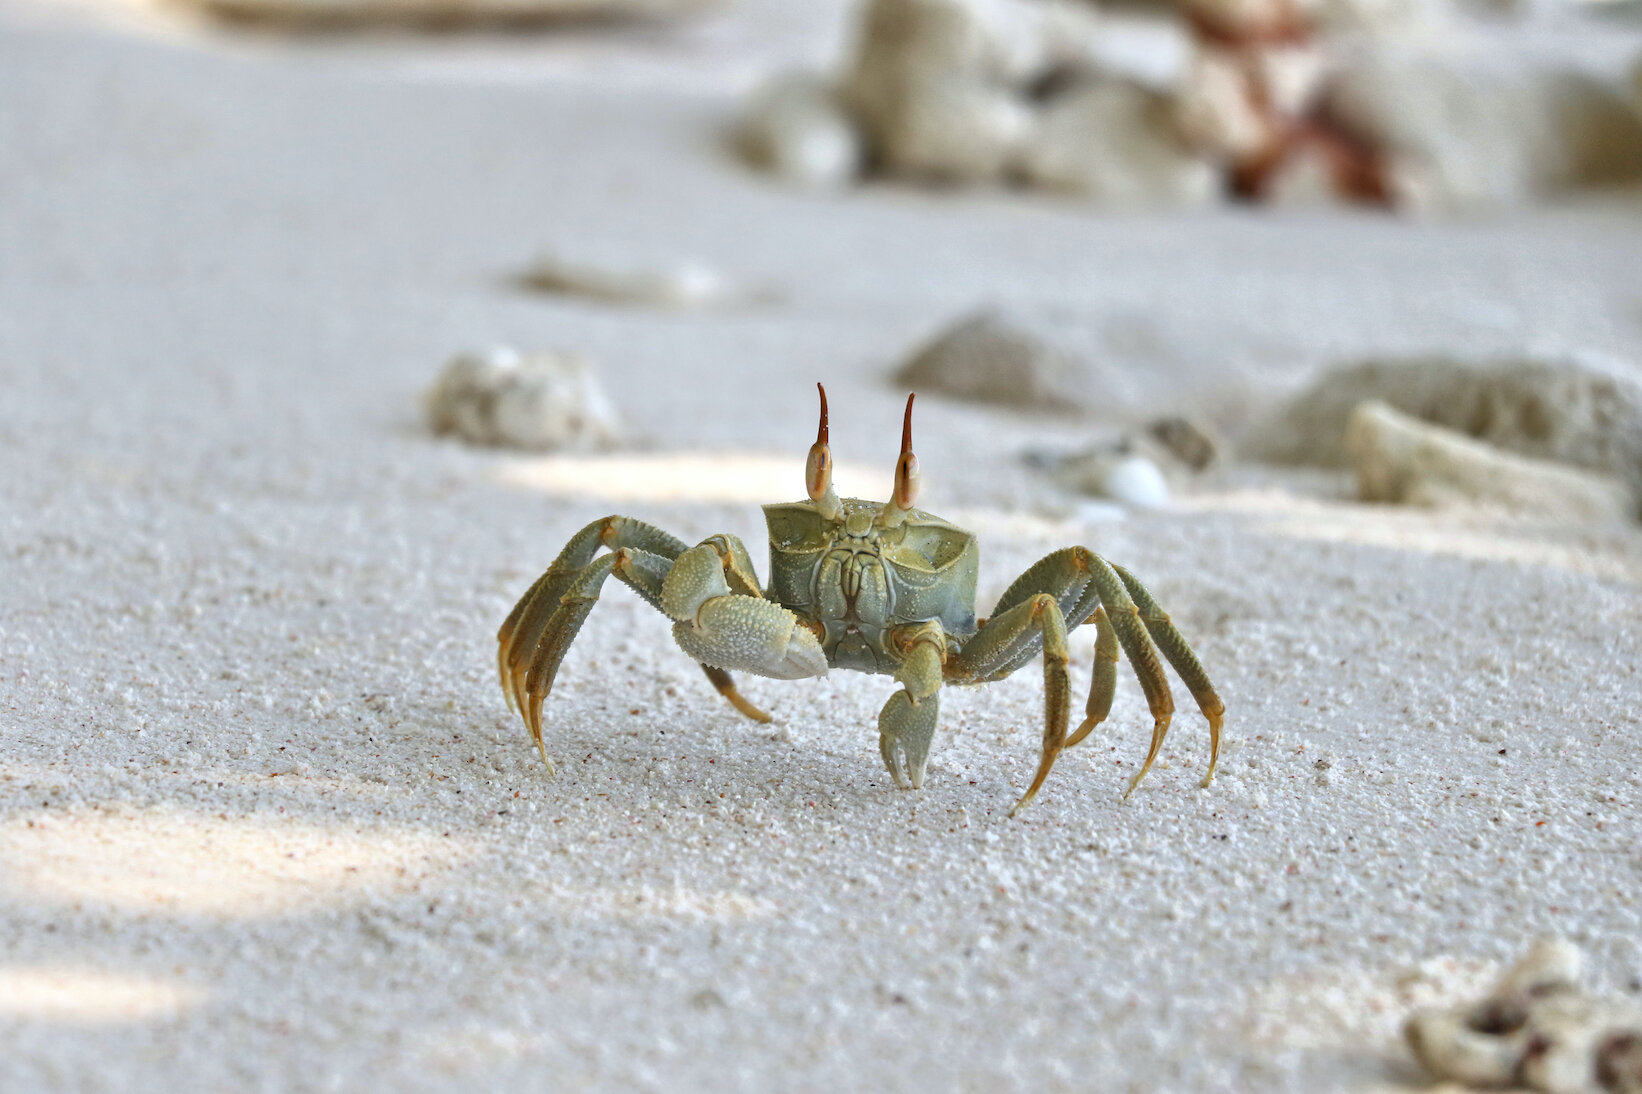 THE ENIGMATIC GHOST CRAB